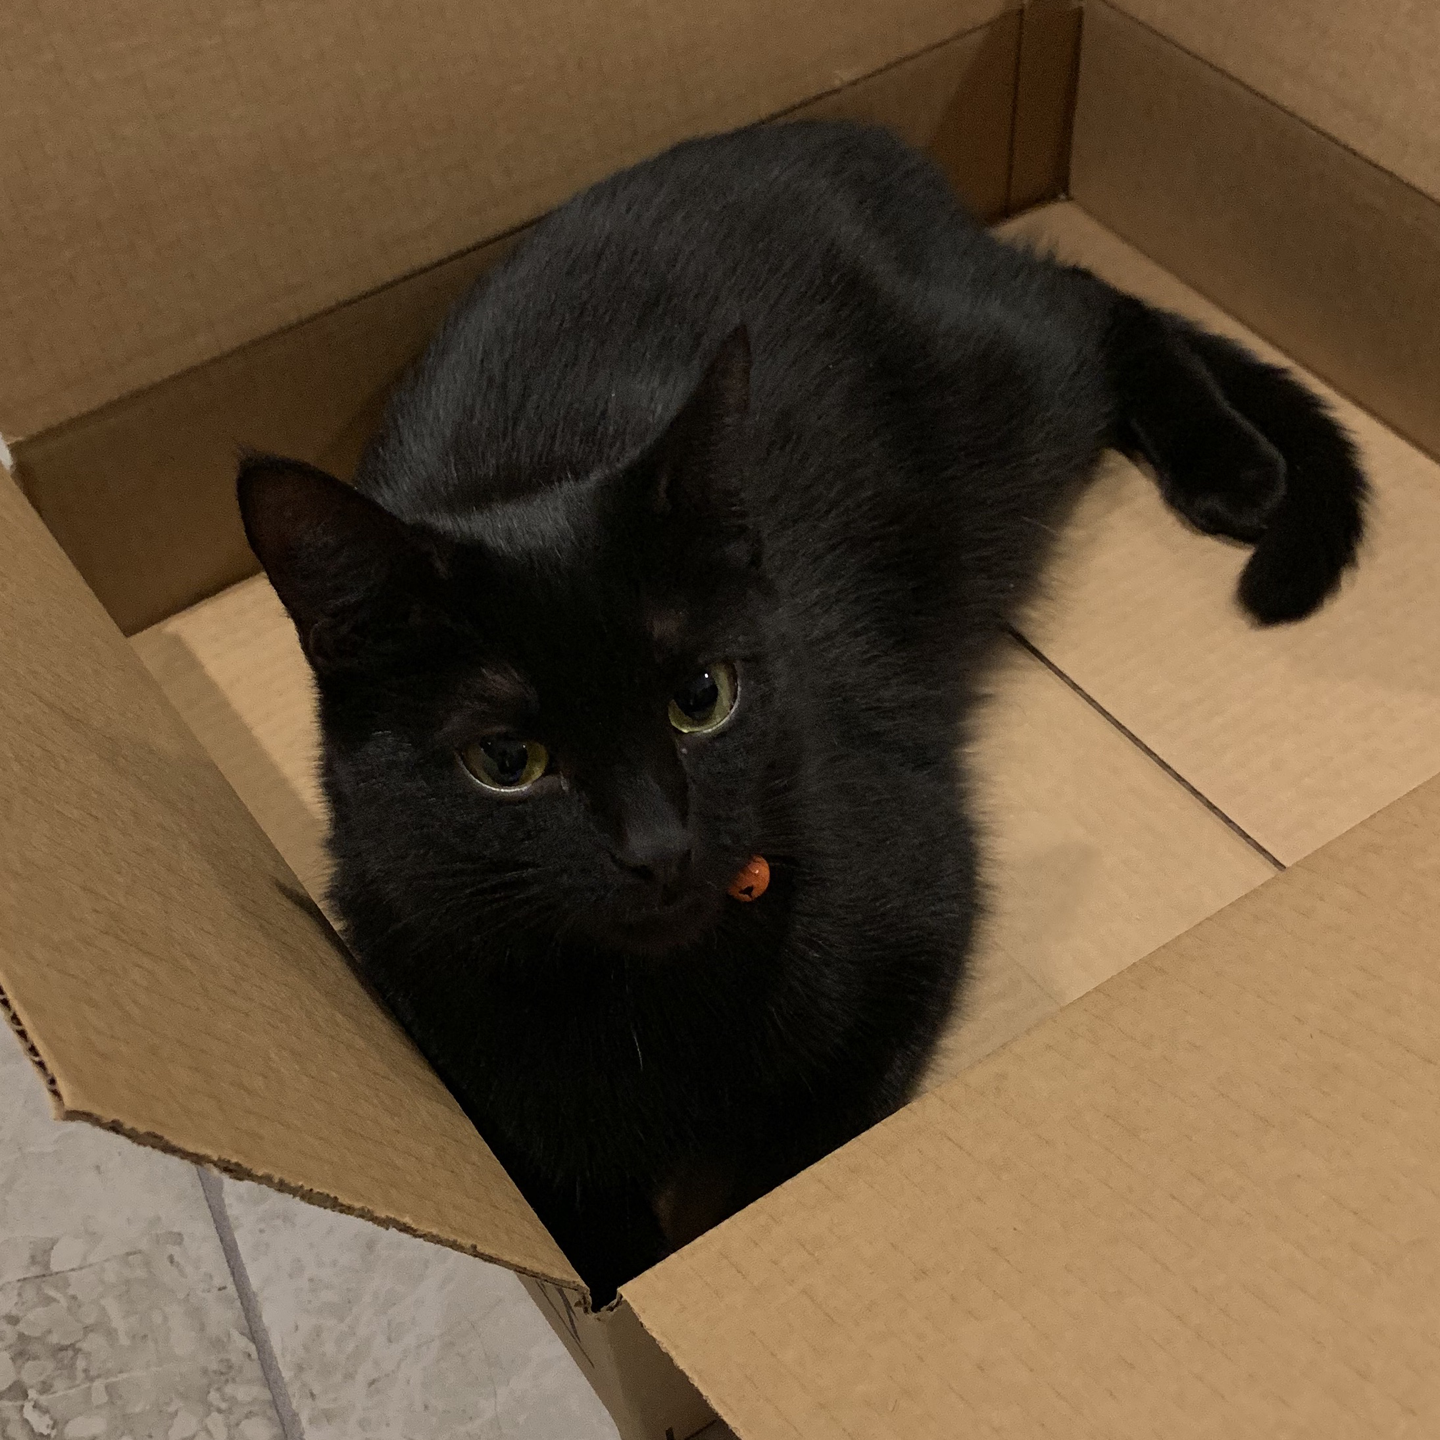 An image of a black cat in a box